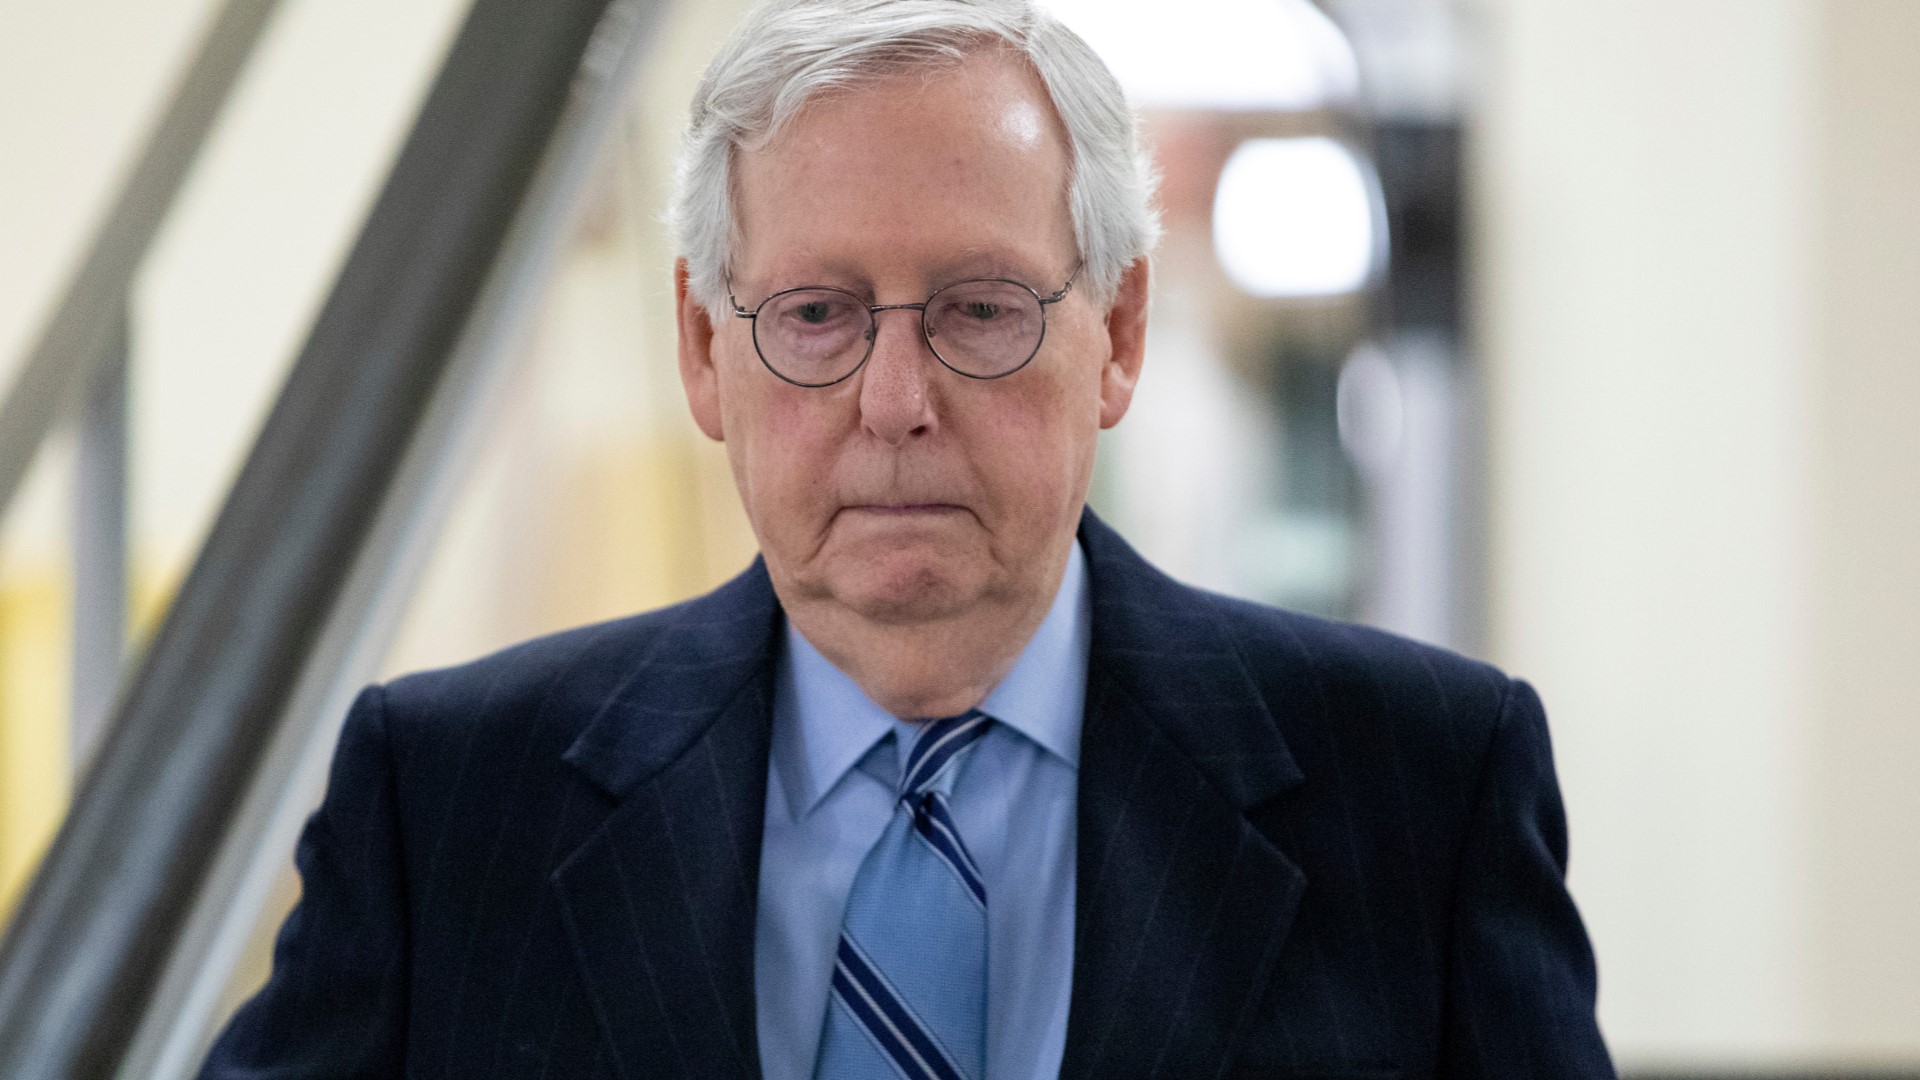 McConnell, 81, was attending a private dinner at a local hotel when he tripped.